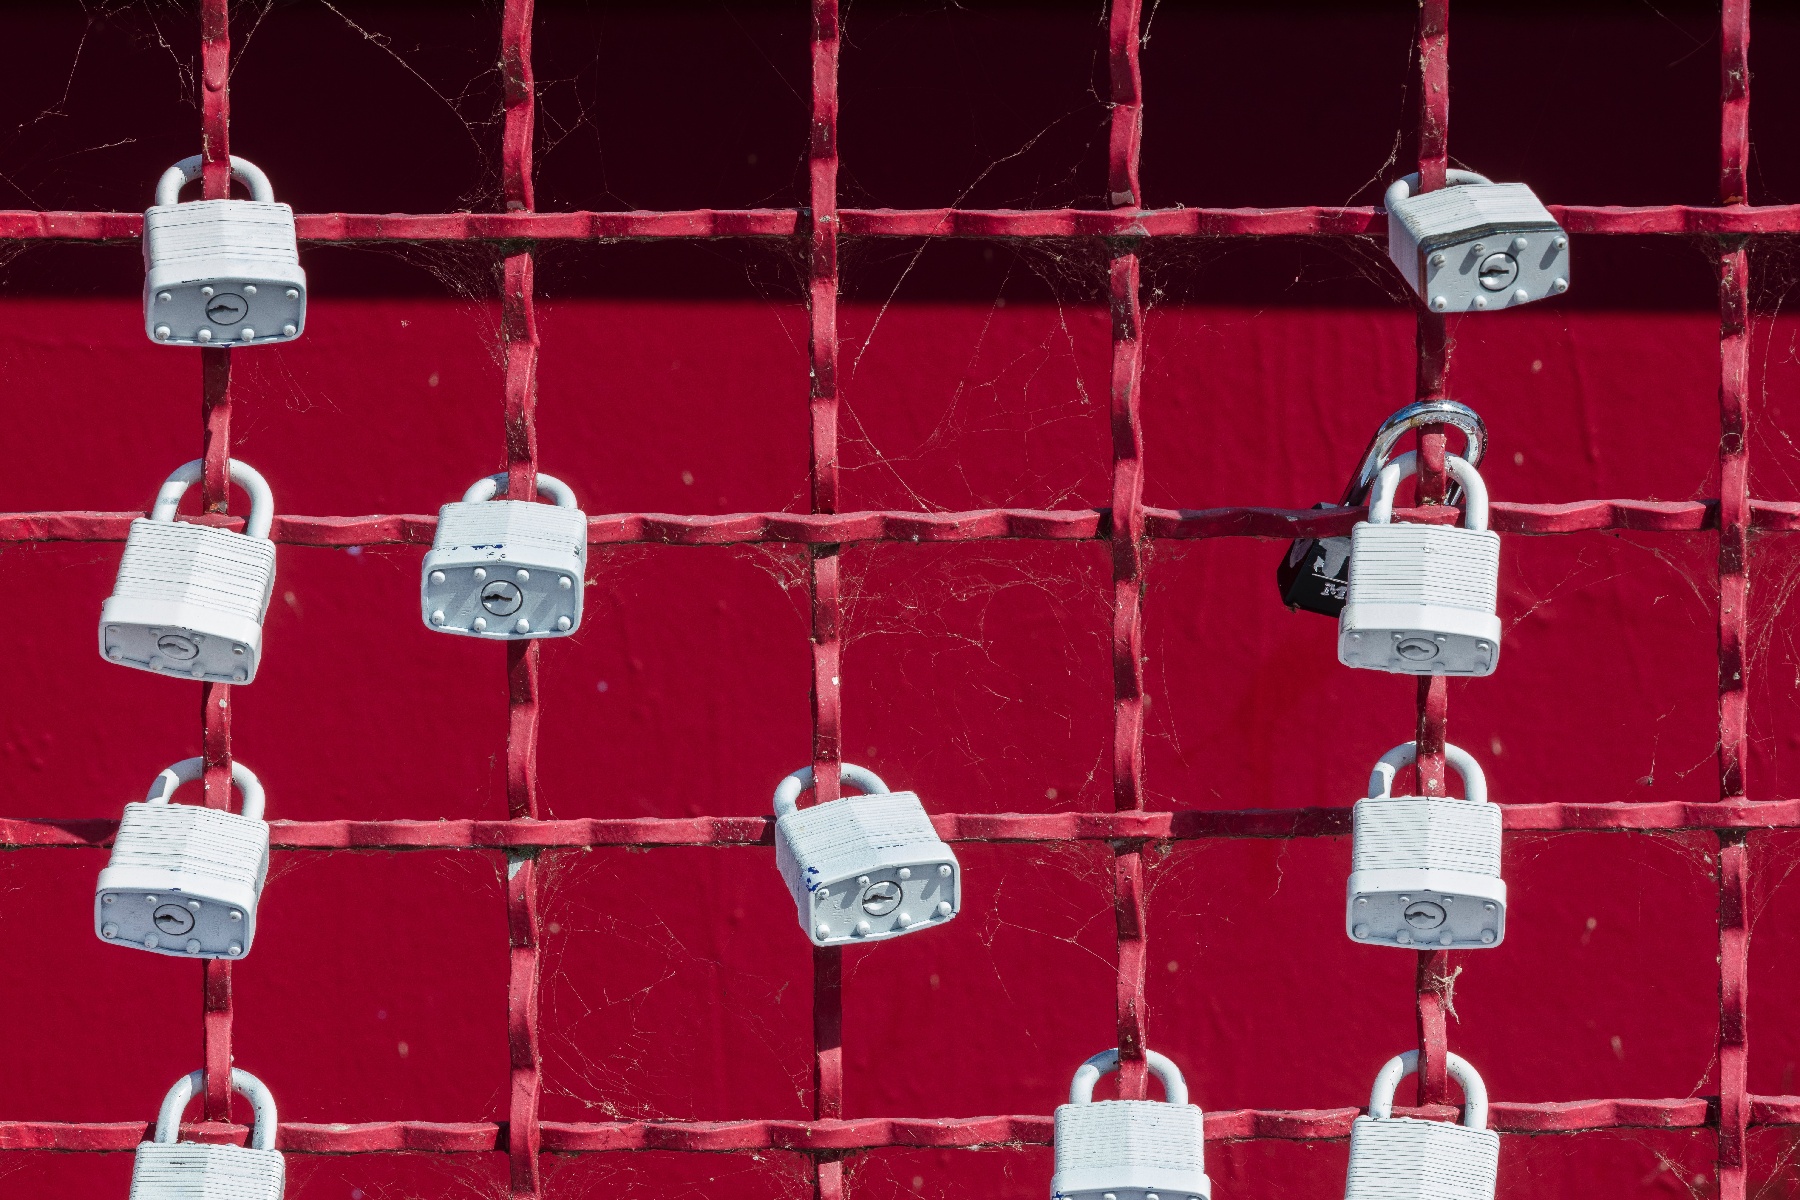 red metallic fence with white locks hanging from it